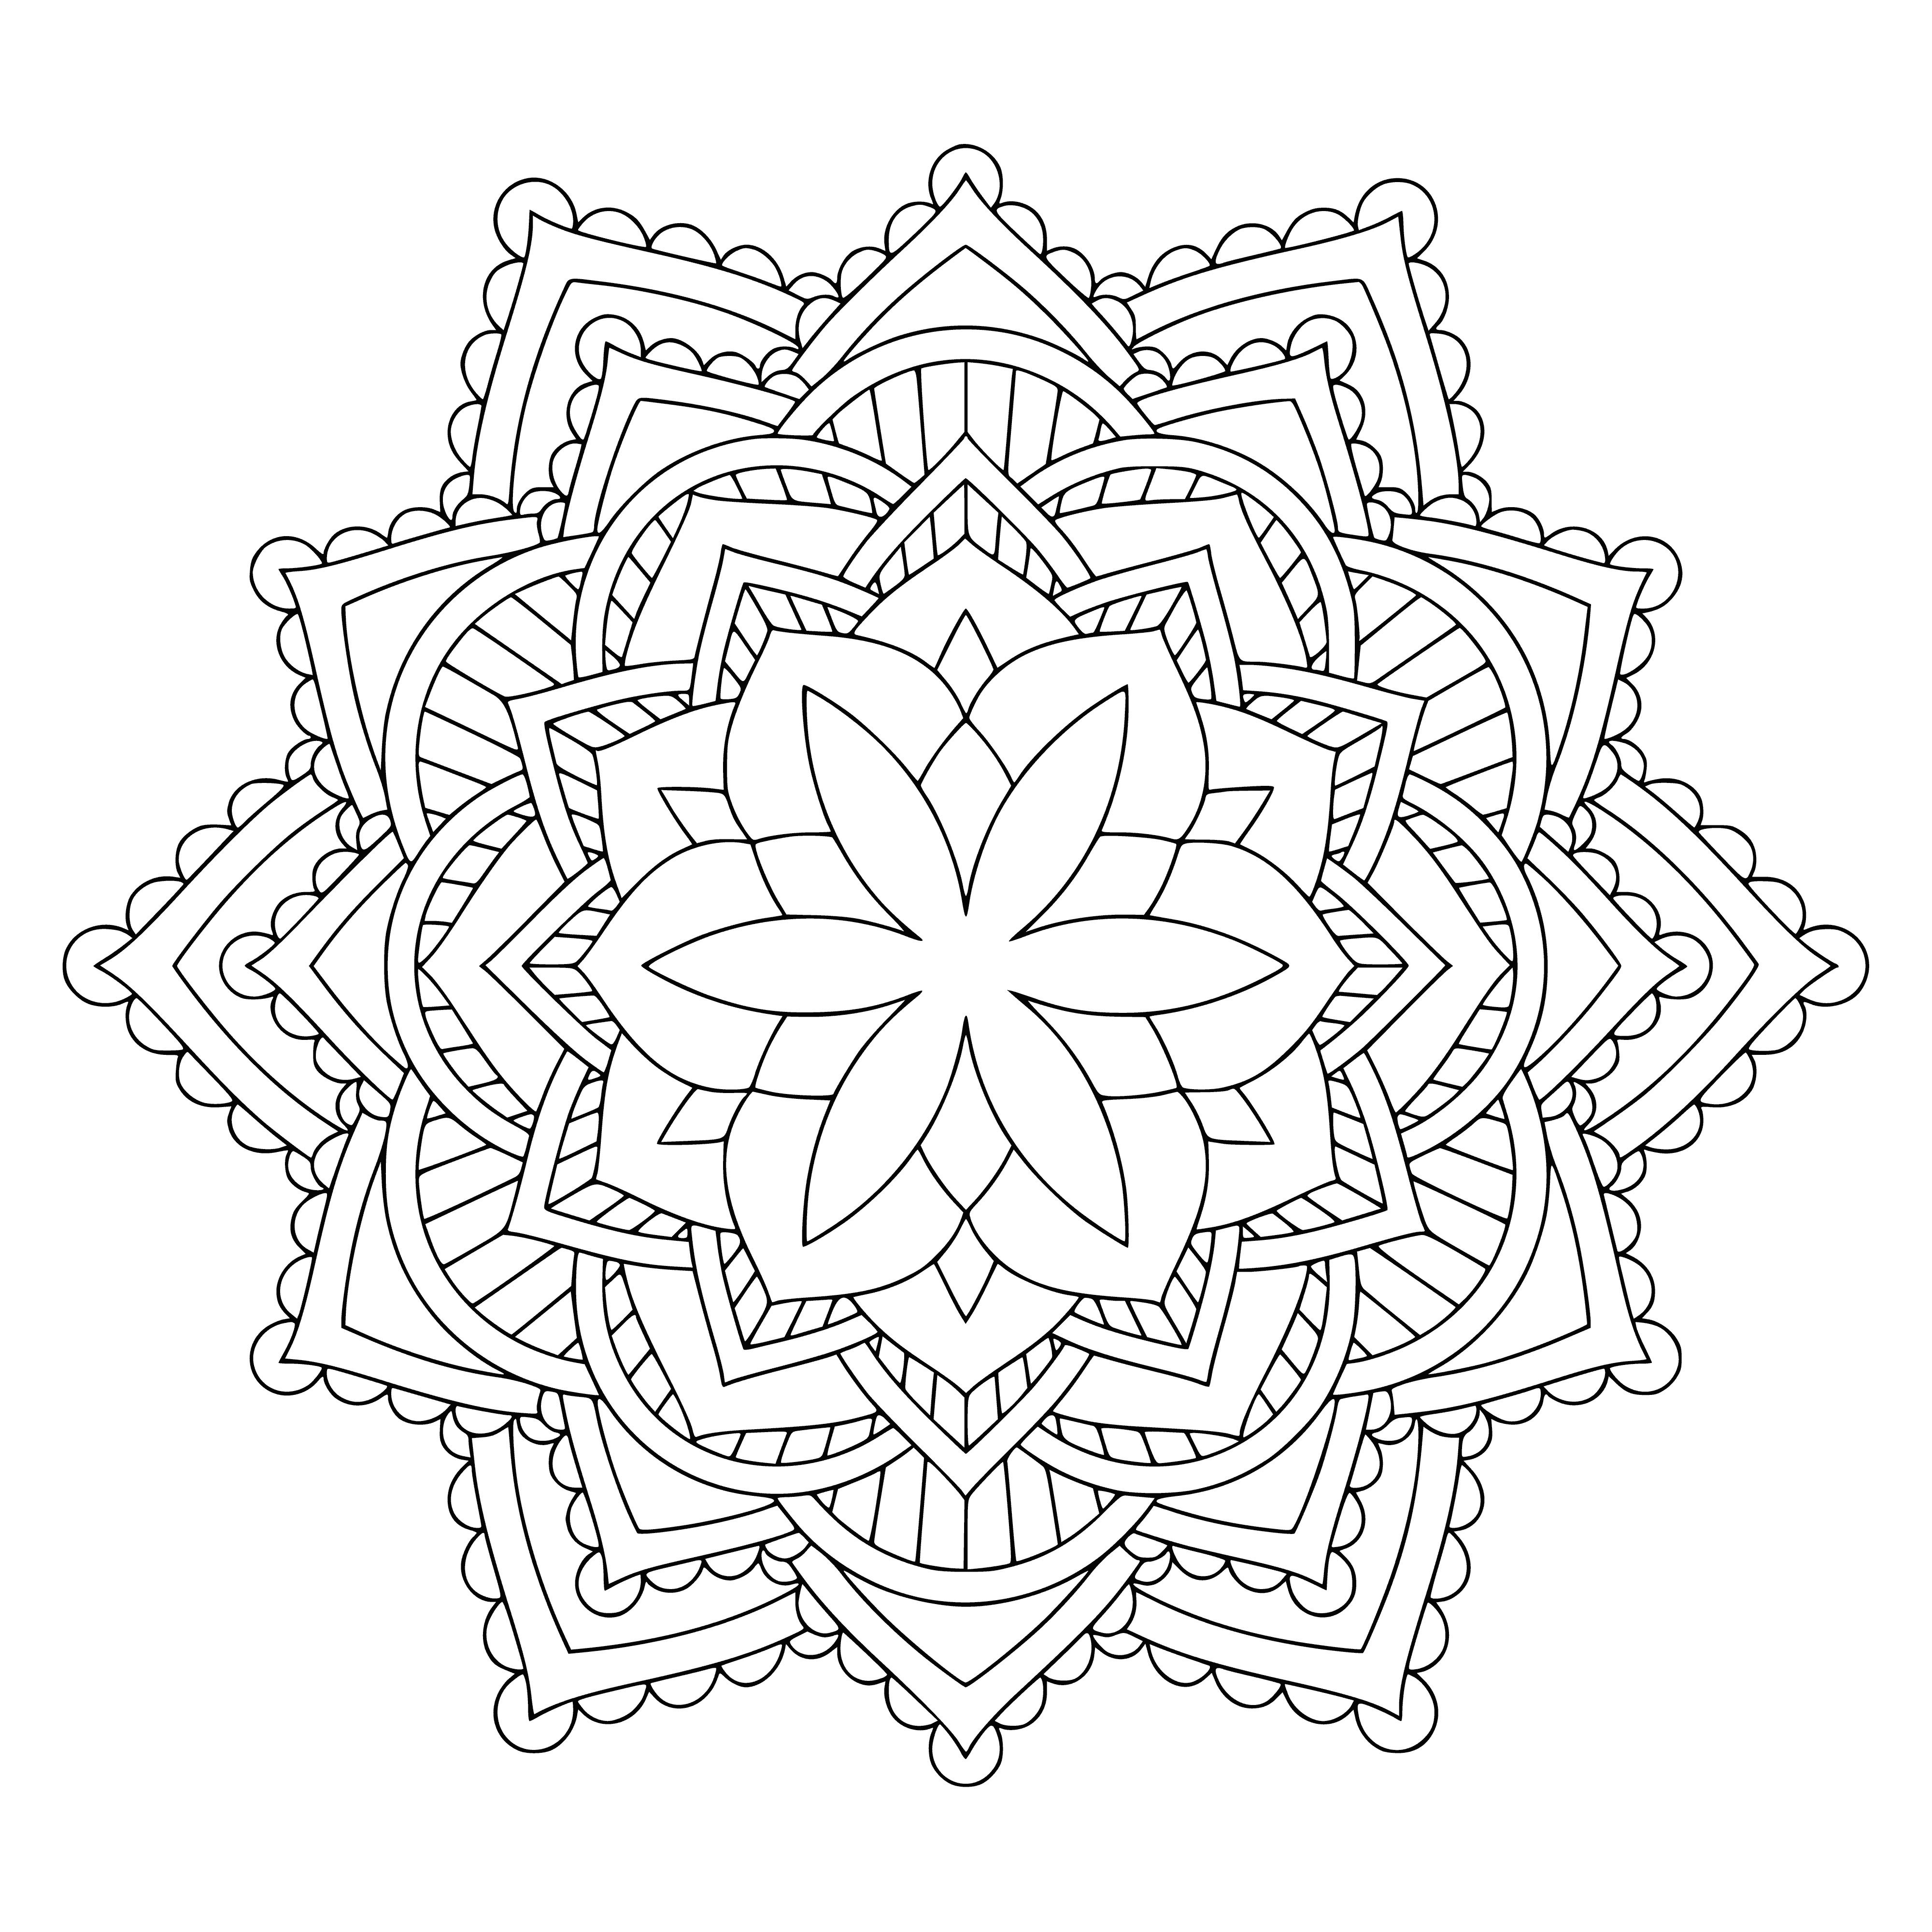 coloring page: Coloring page includes bright, vibrant flower mandala design made up of intricate patterns & shapes to form a symmetrical & well-balanced design. Fun & enjoyable experience.